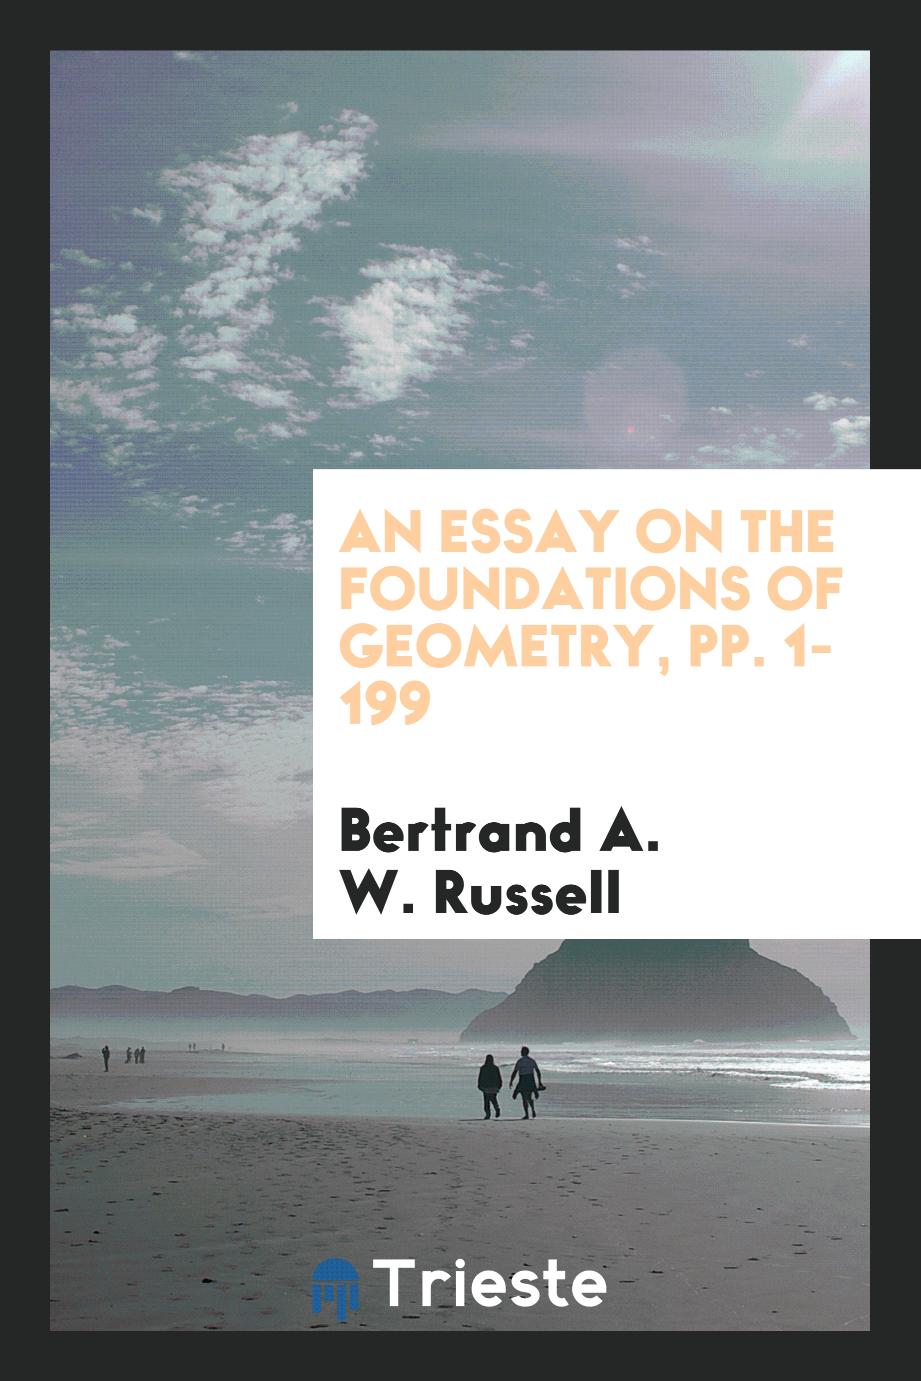 An Essay on the Foundations of Geometry, pp. 1-199